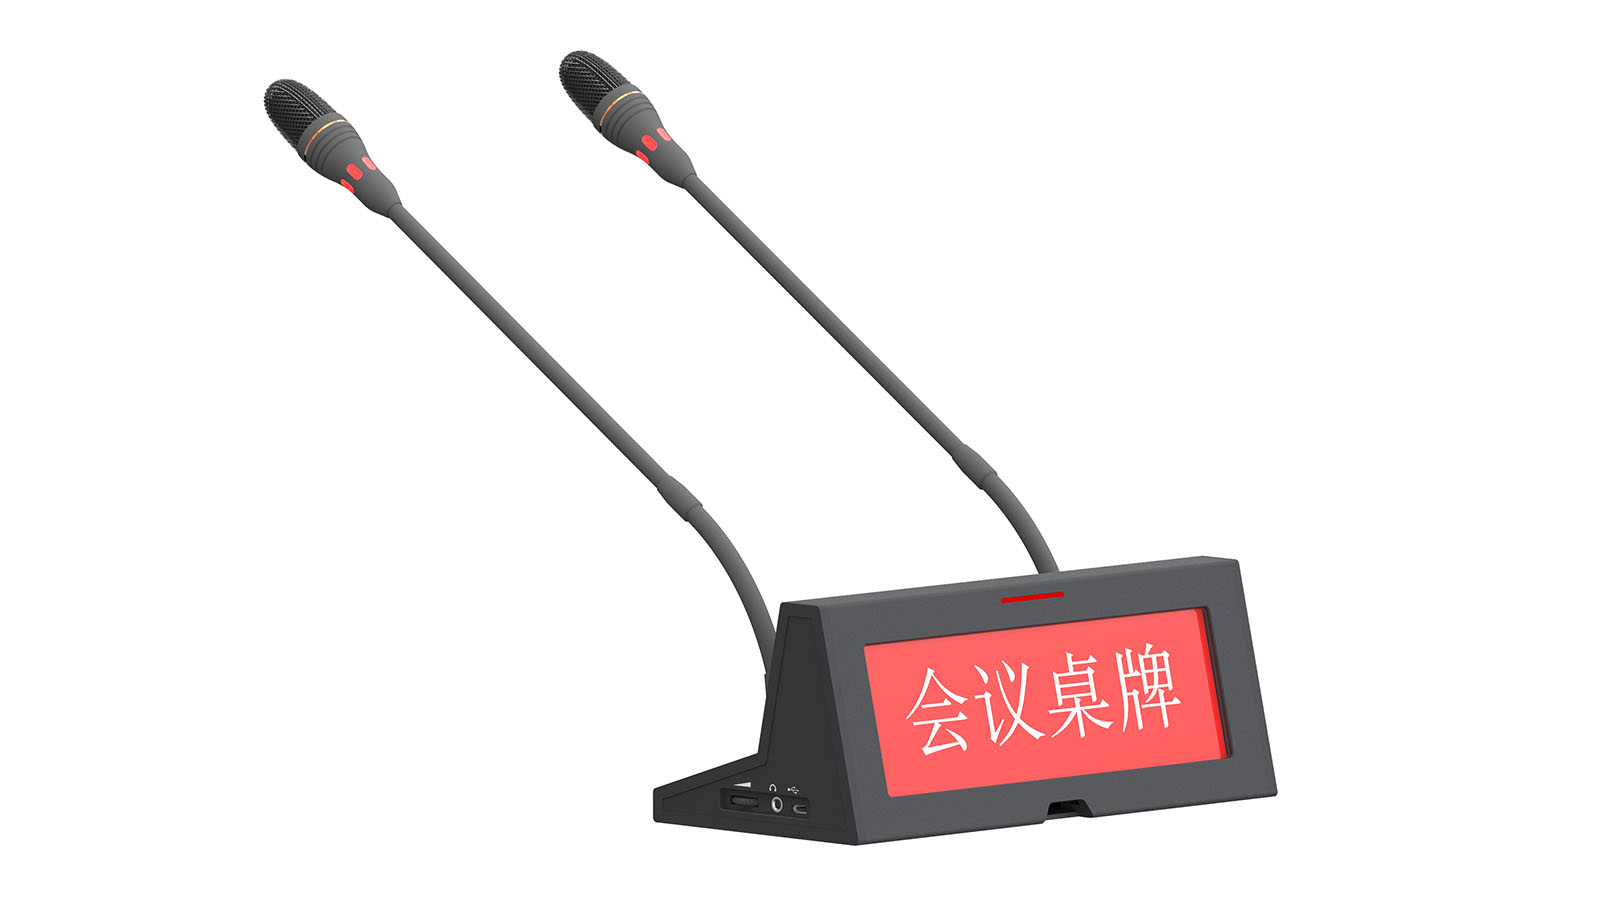 Table Card Conference Representative Microphone Long Pole